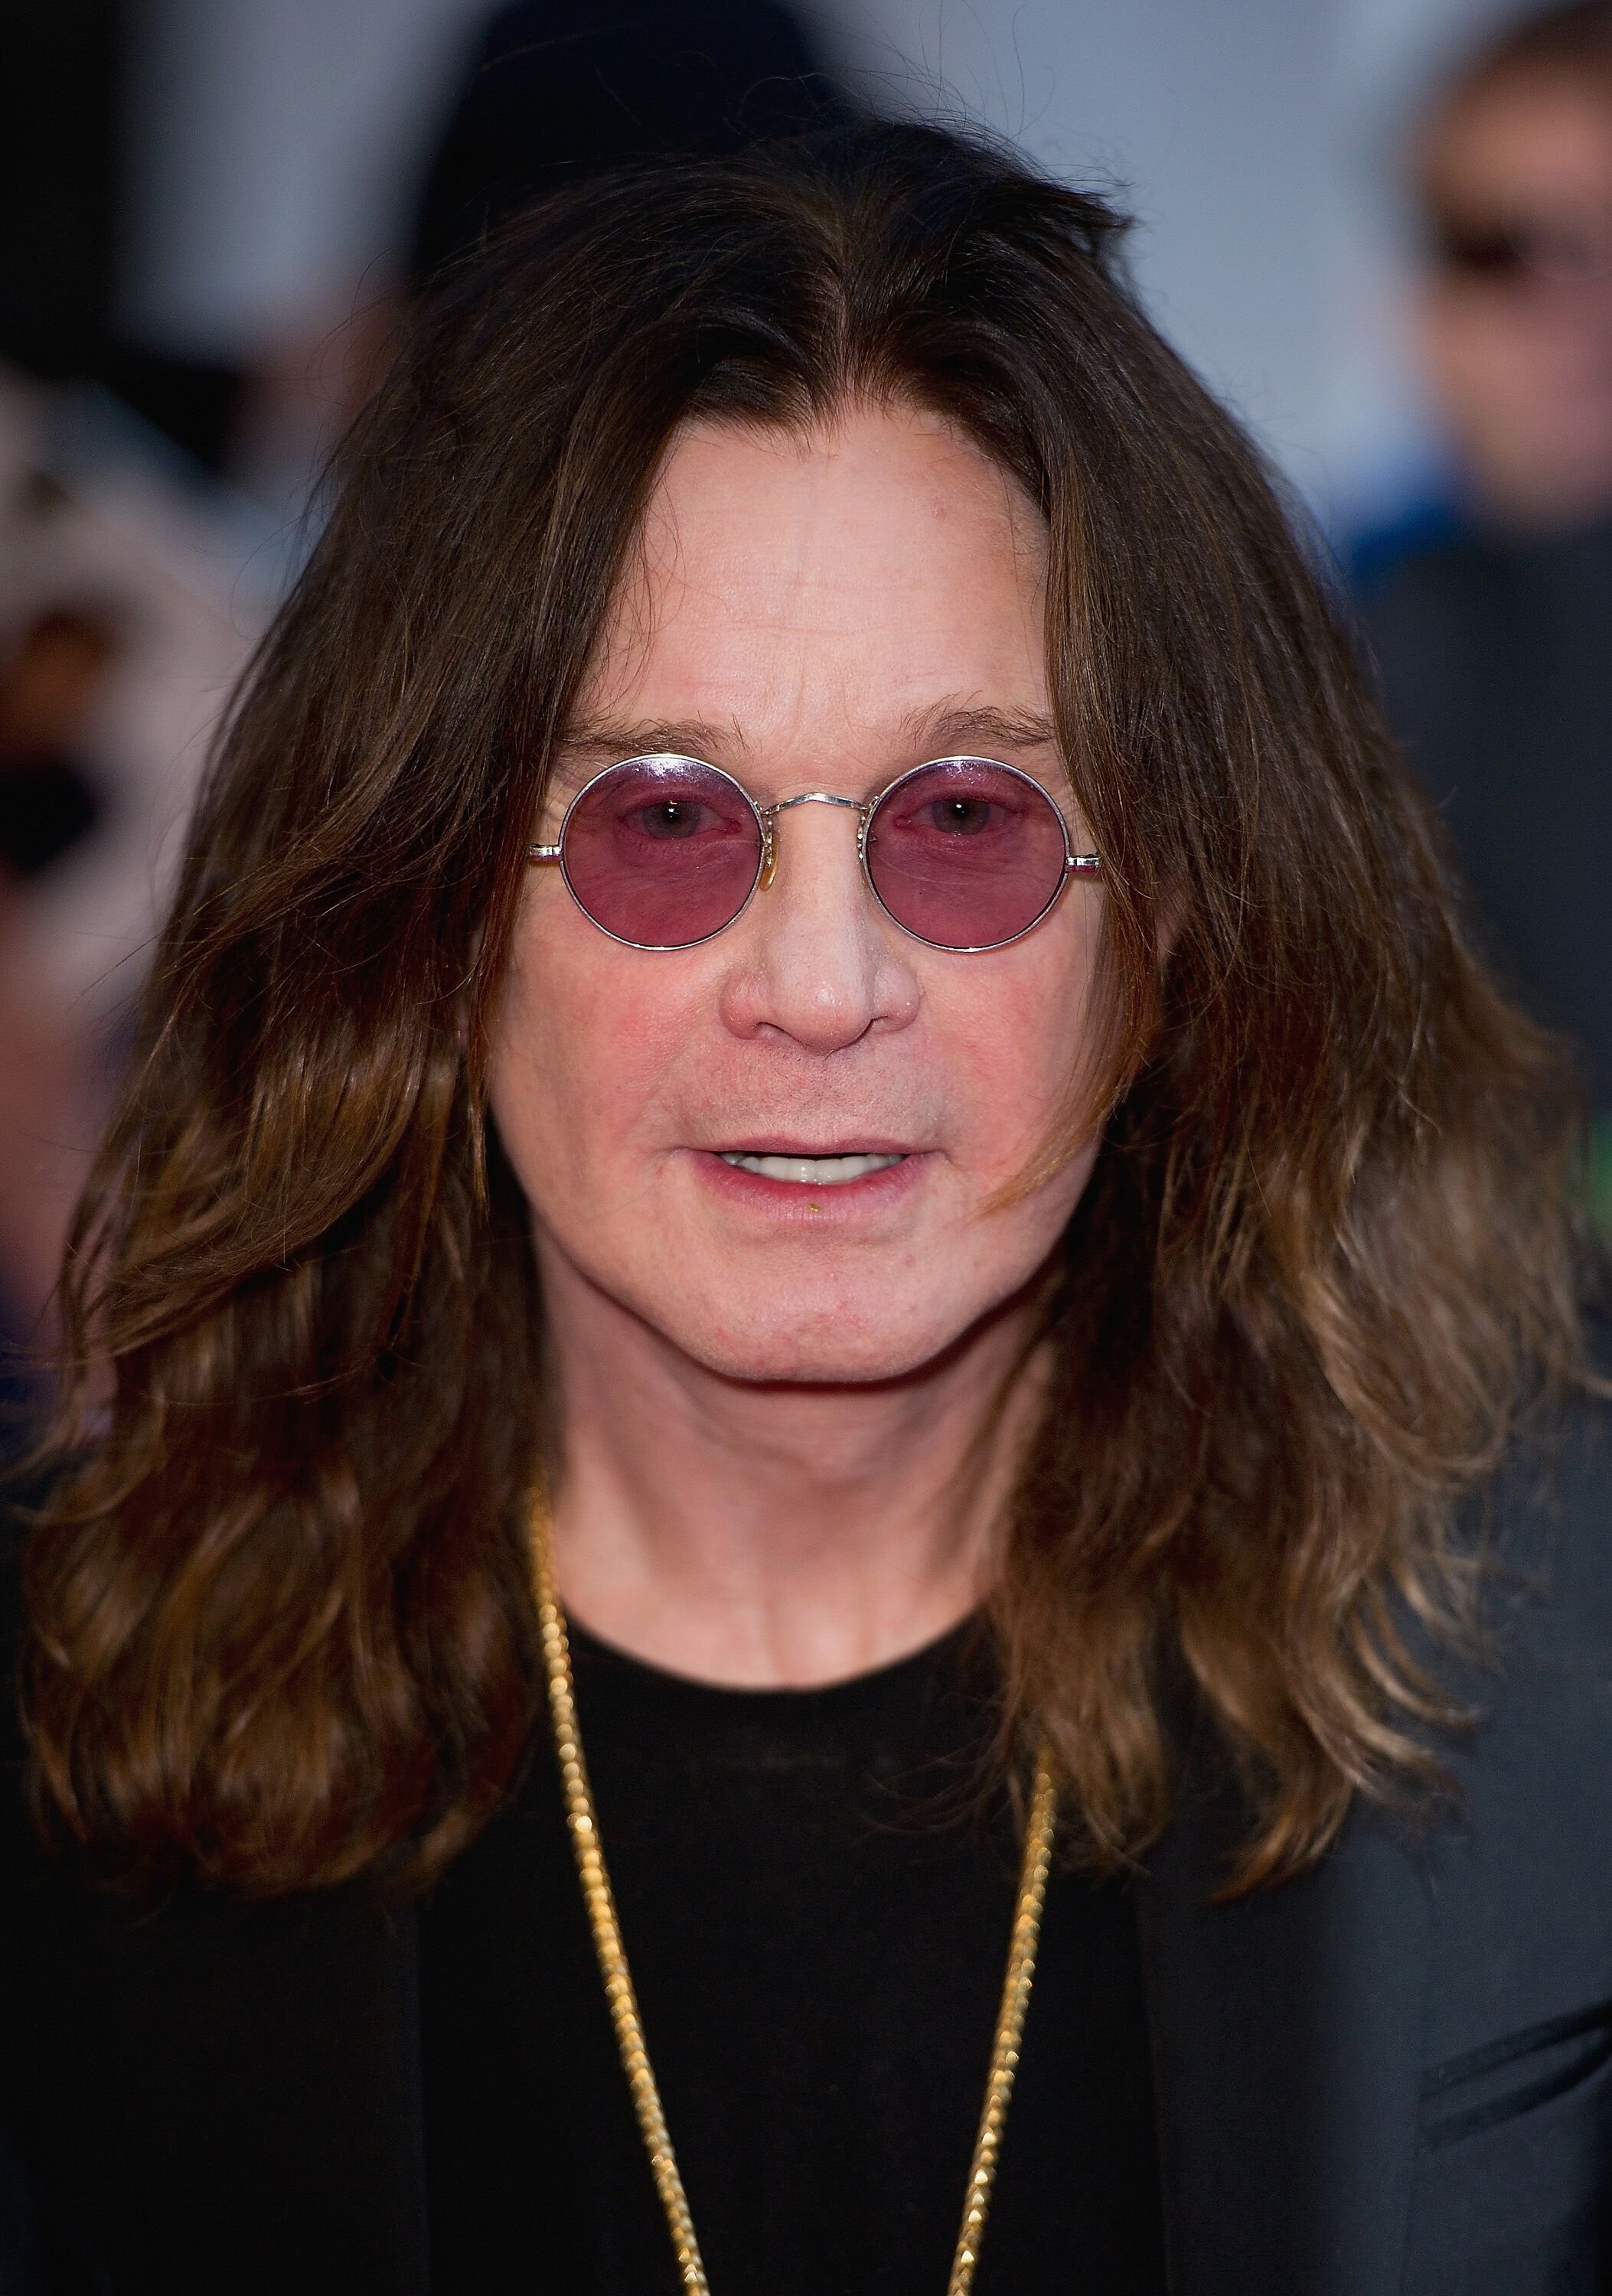 Ozzy Osbourne attends the Pride of Britain awards. | Source: Getty Images